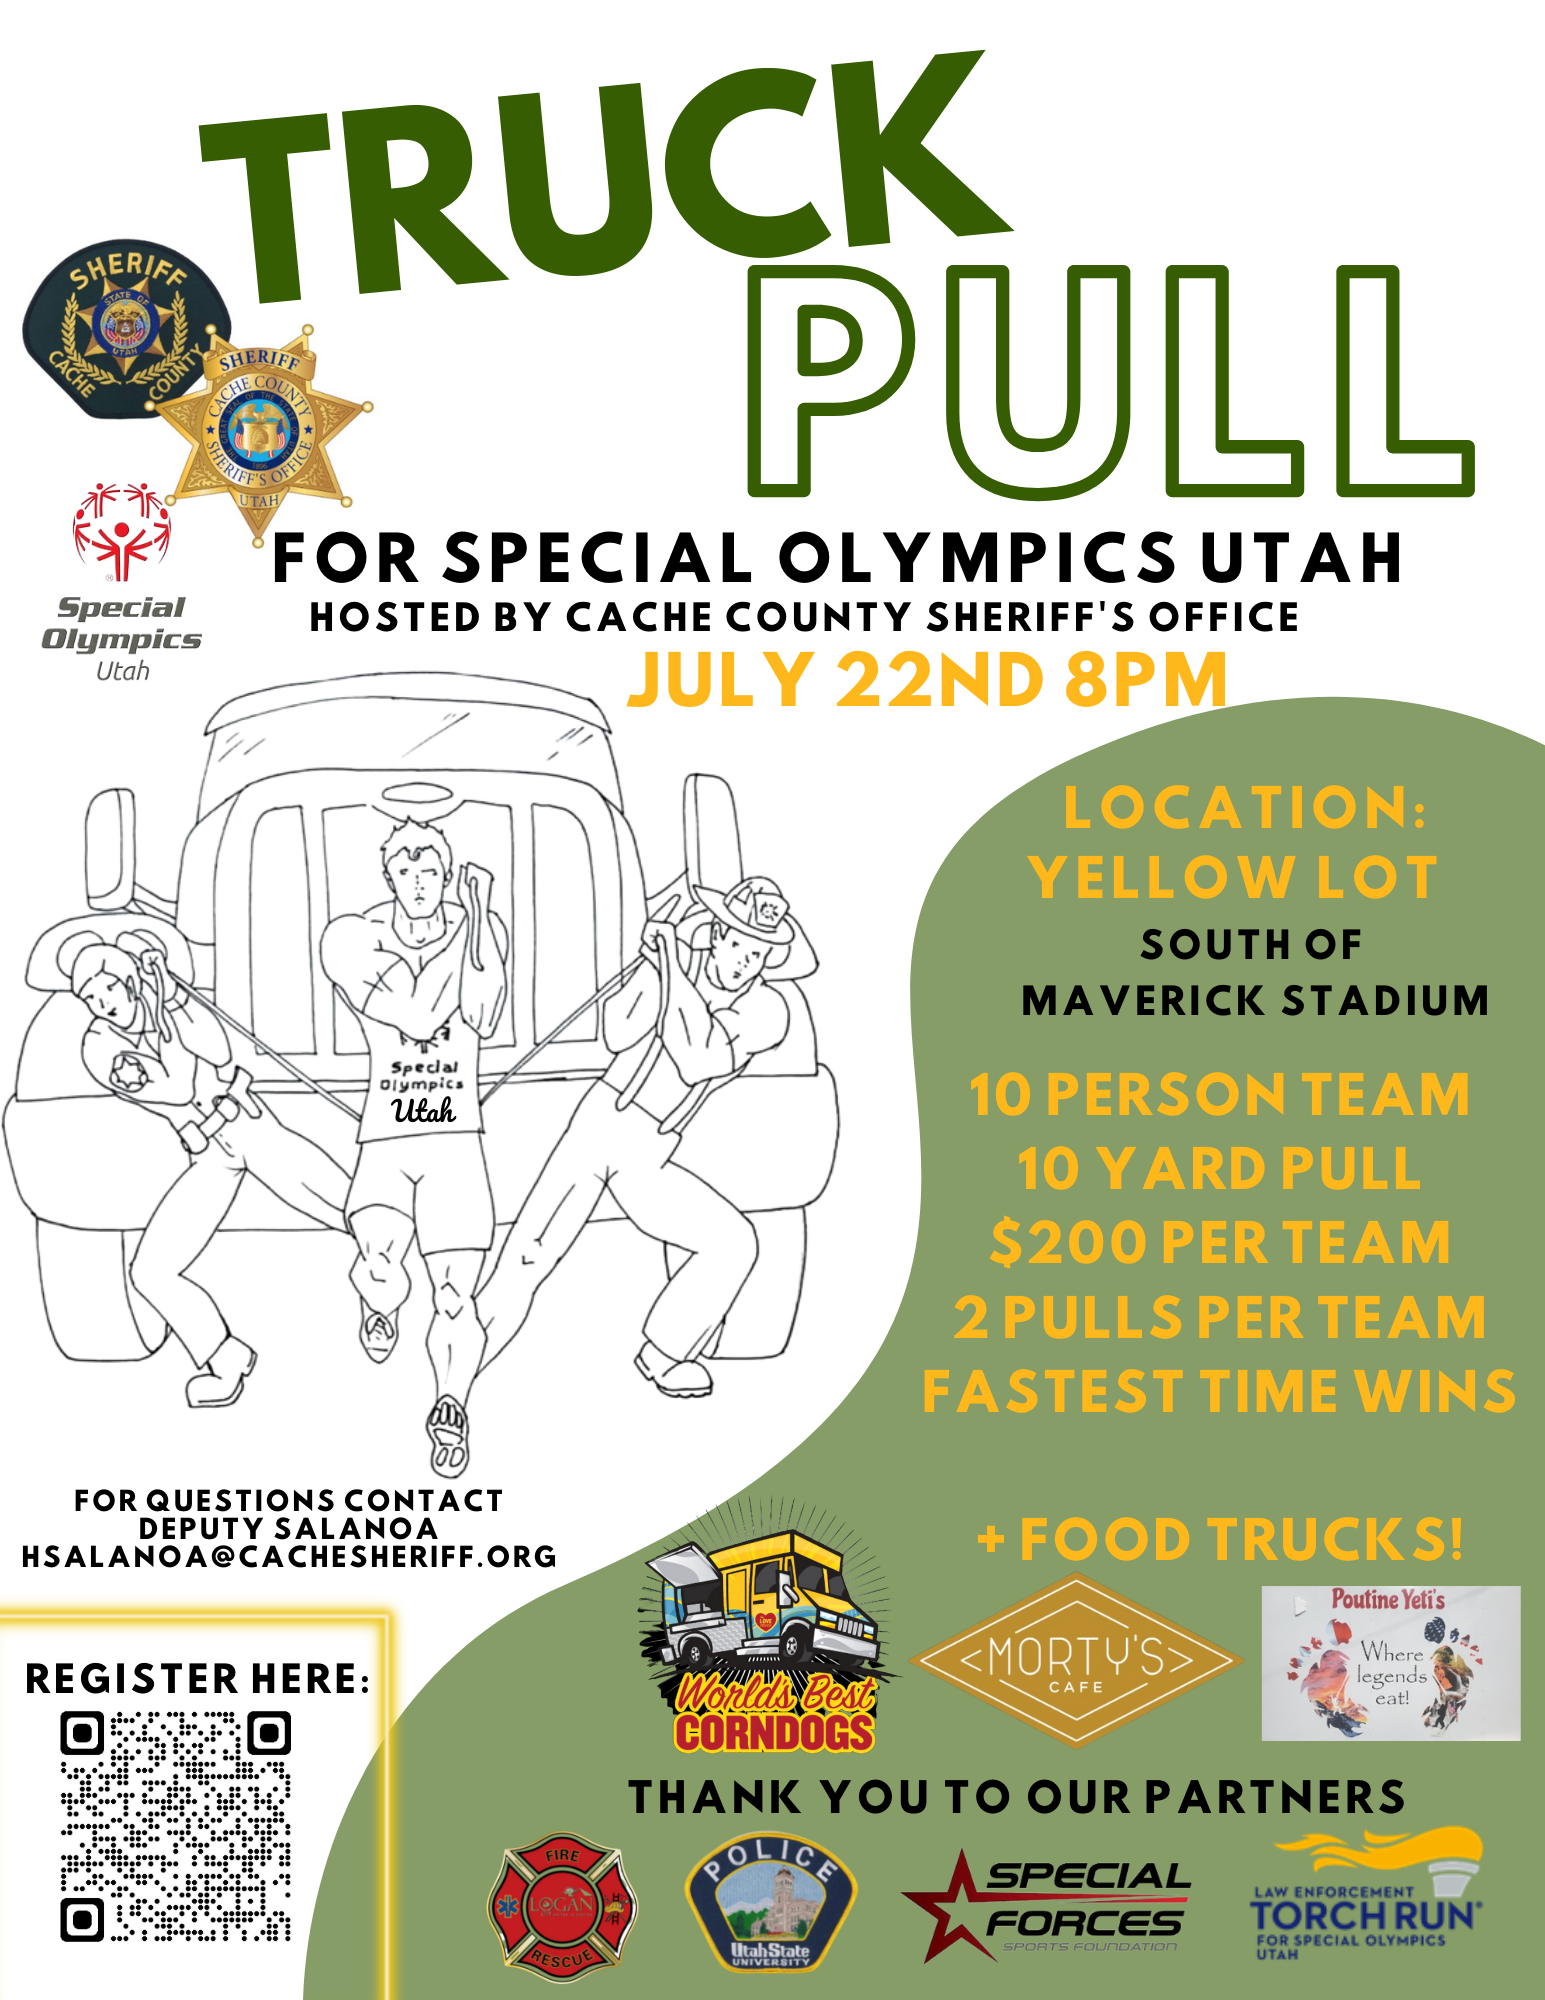 Truck Pull Hosted by Cache County Sheriff's Office Special Olympics Utah